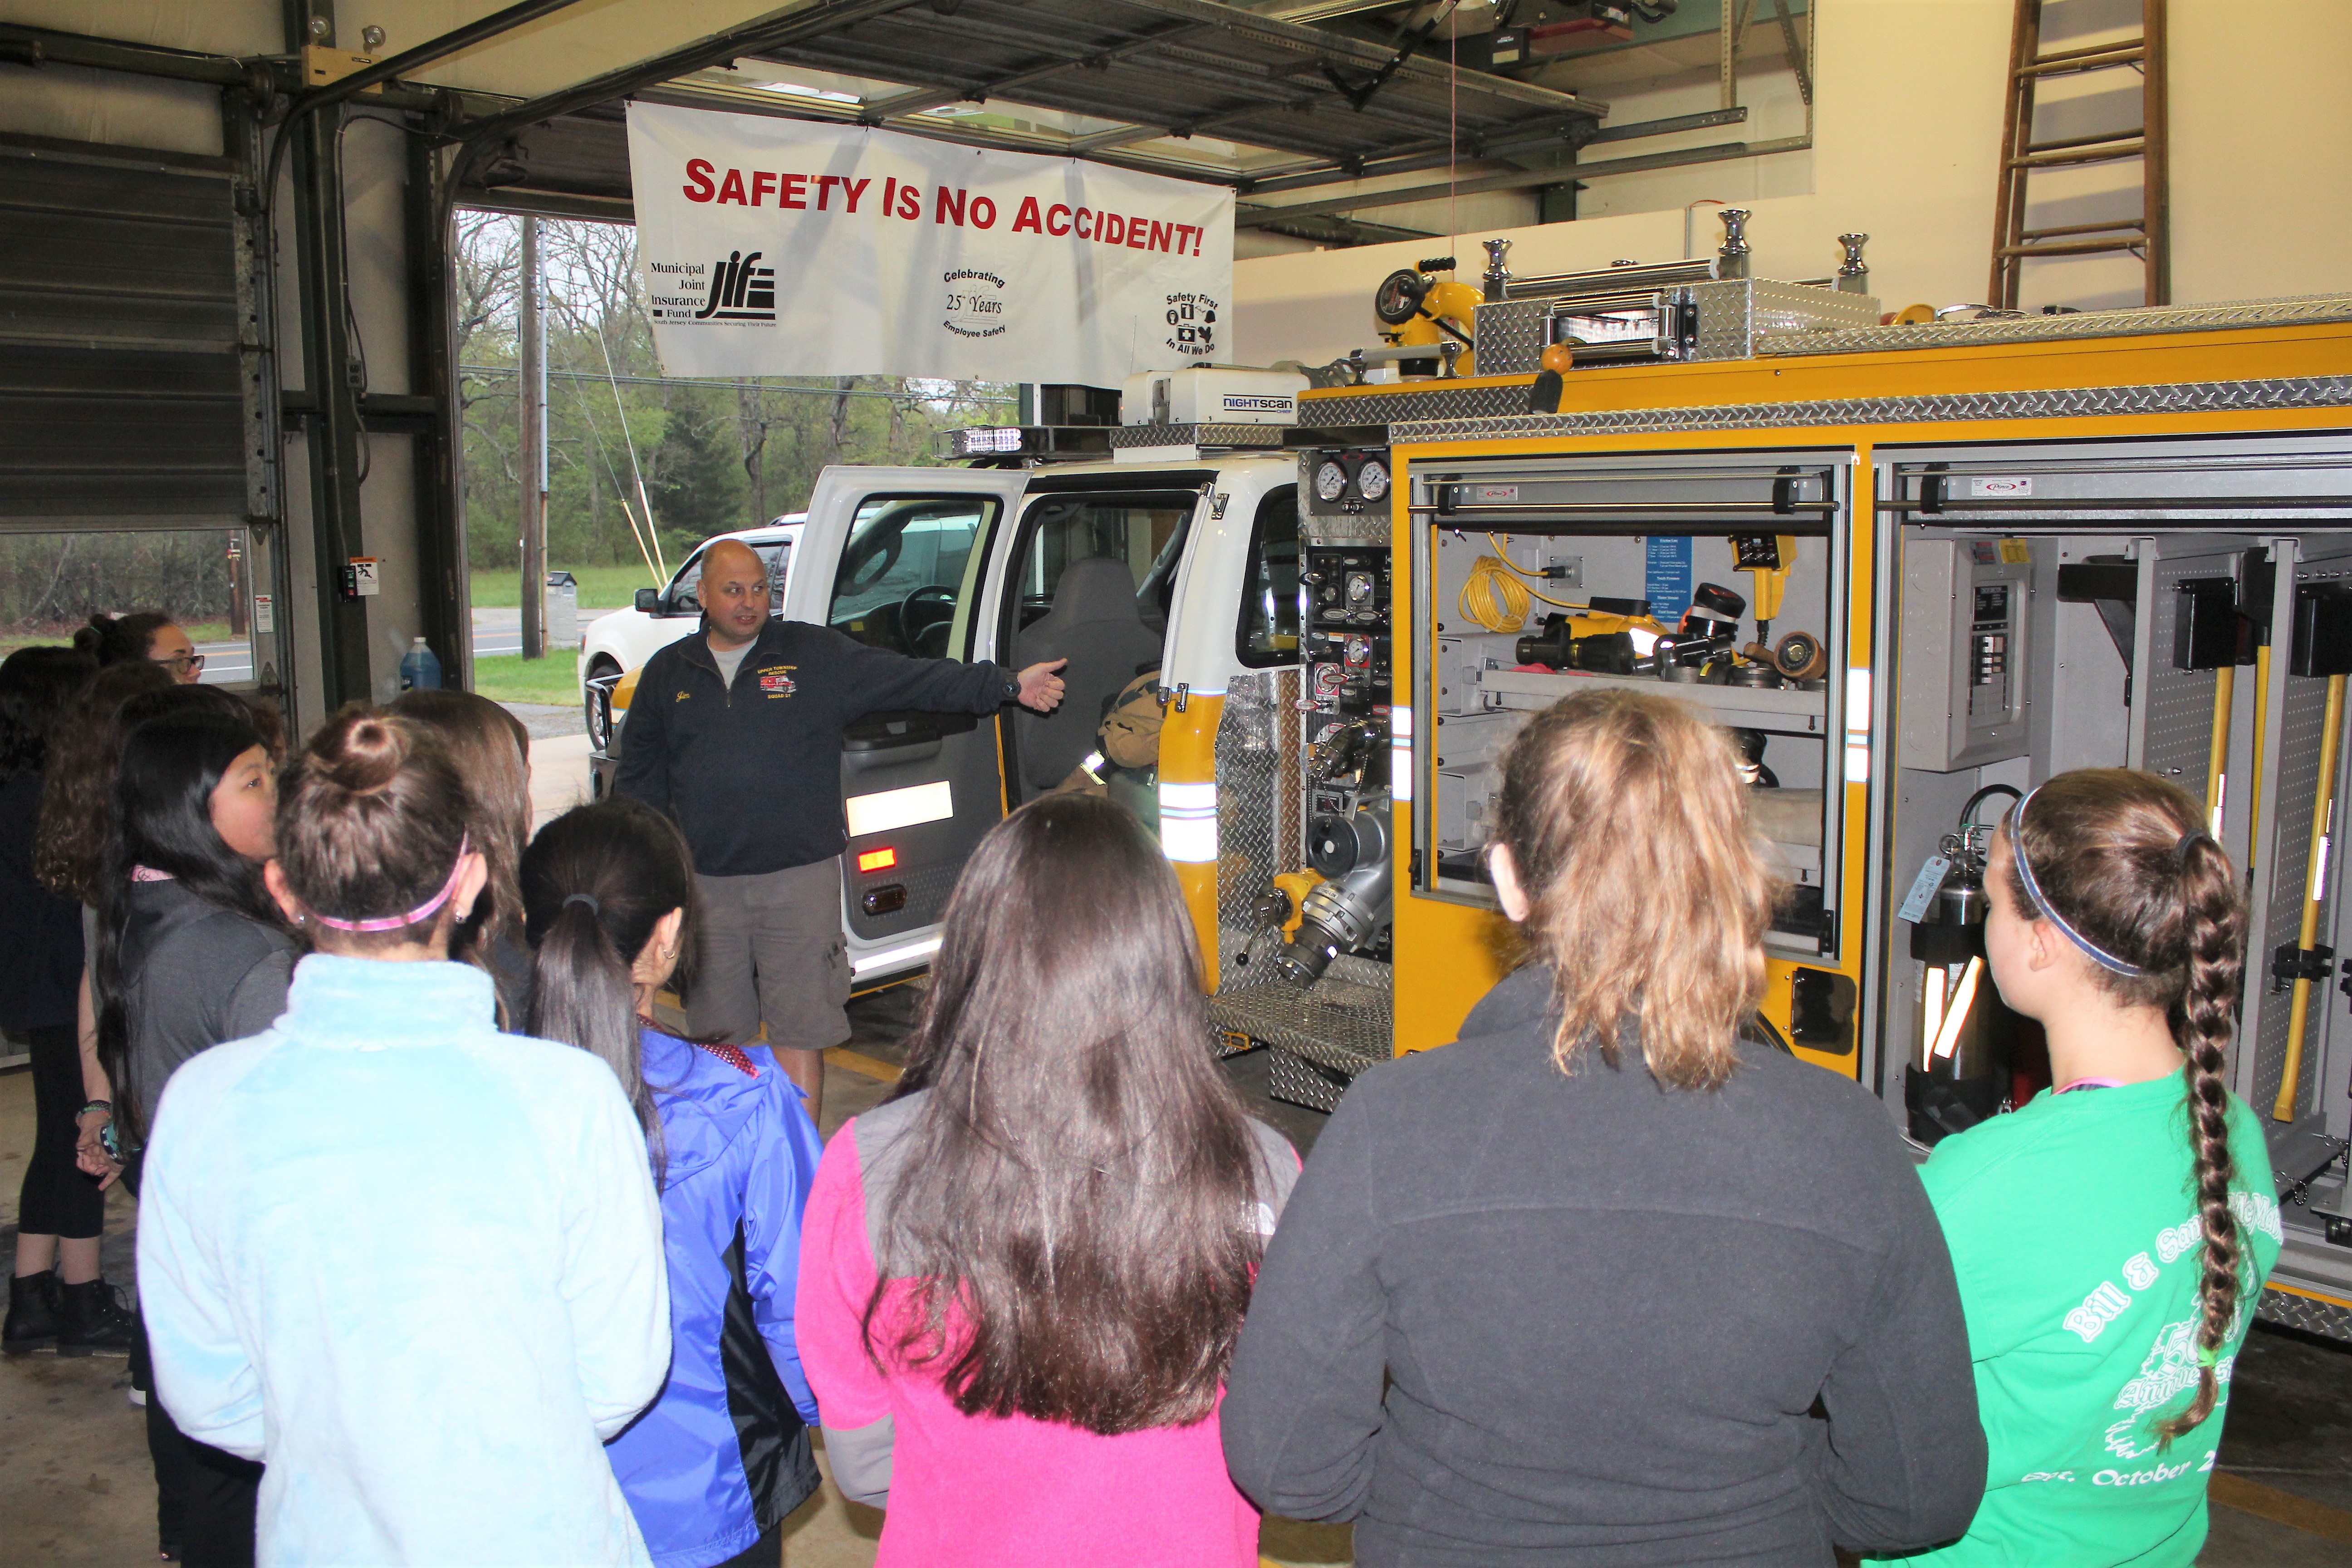 Girl Scouts of Central and Southern New Jersey meet at the Upper Township Rescue Squad building April 25 to tour the facility and learn about first aid. The scouts were able to get an up close and personal look at an ambulance as part of their training.  